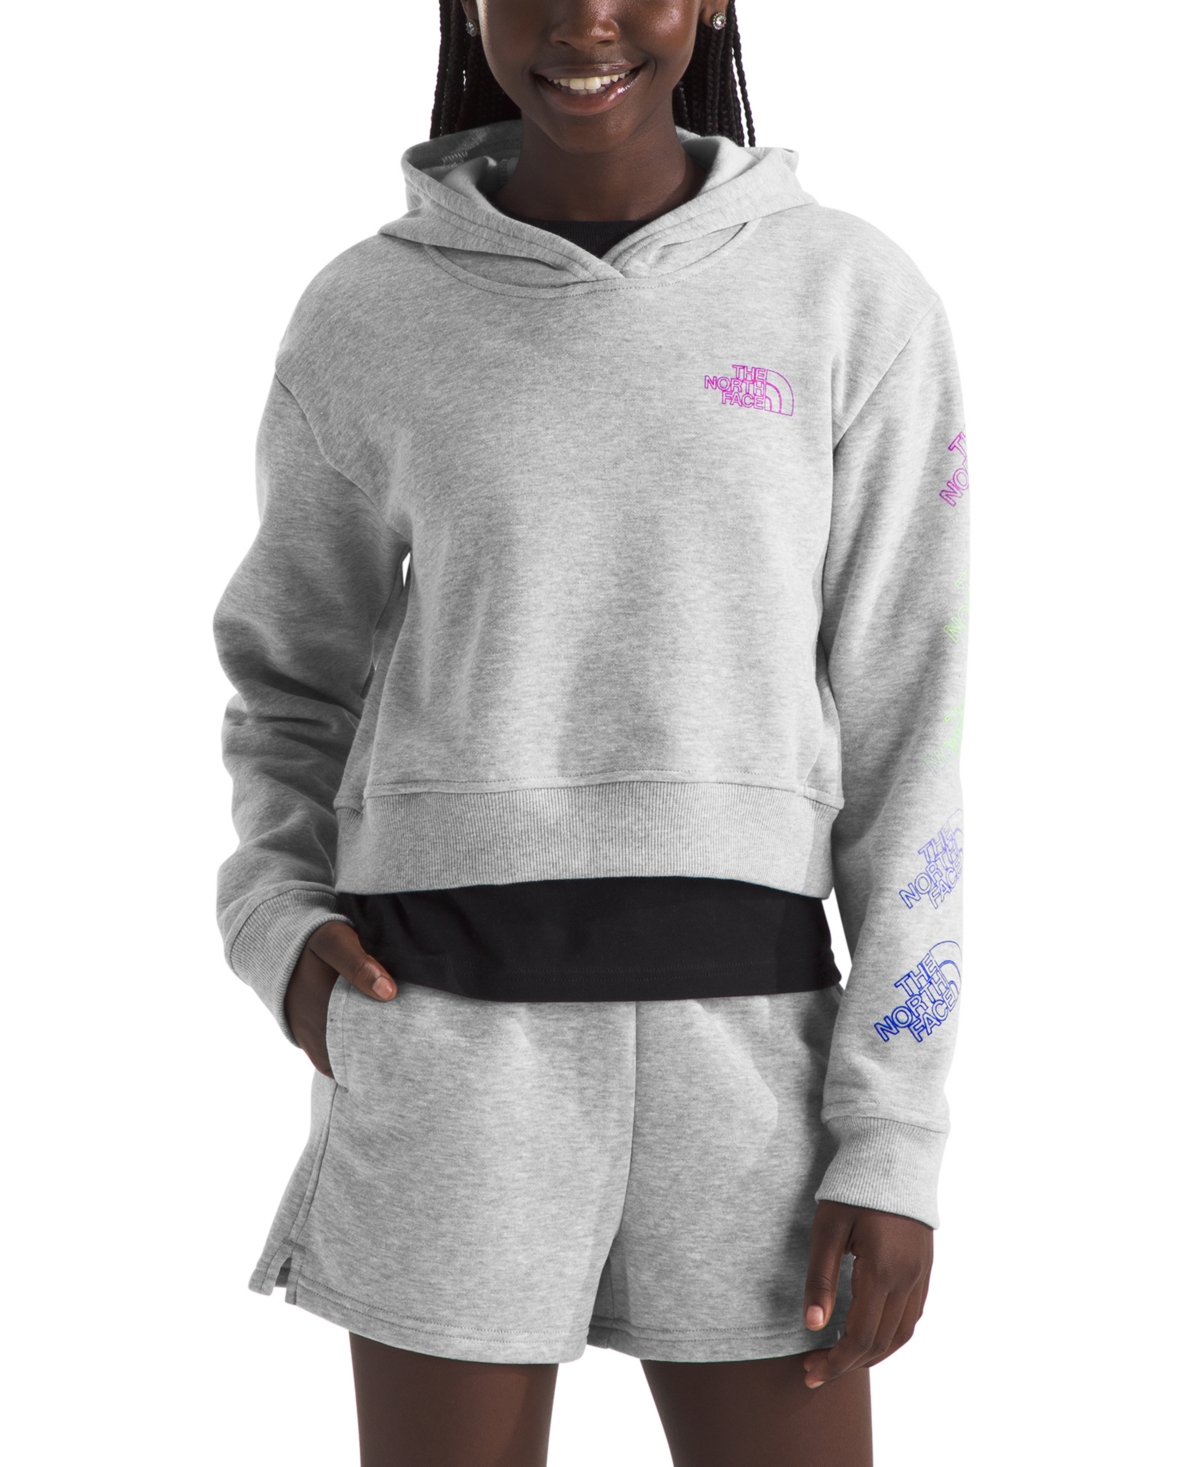 The North Face Kids' Big Girls Camp Fleece Pullover Hoodie In Tnf Light Grey Heather,multi-color